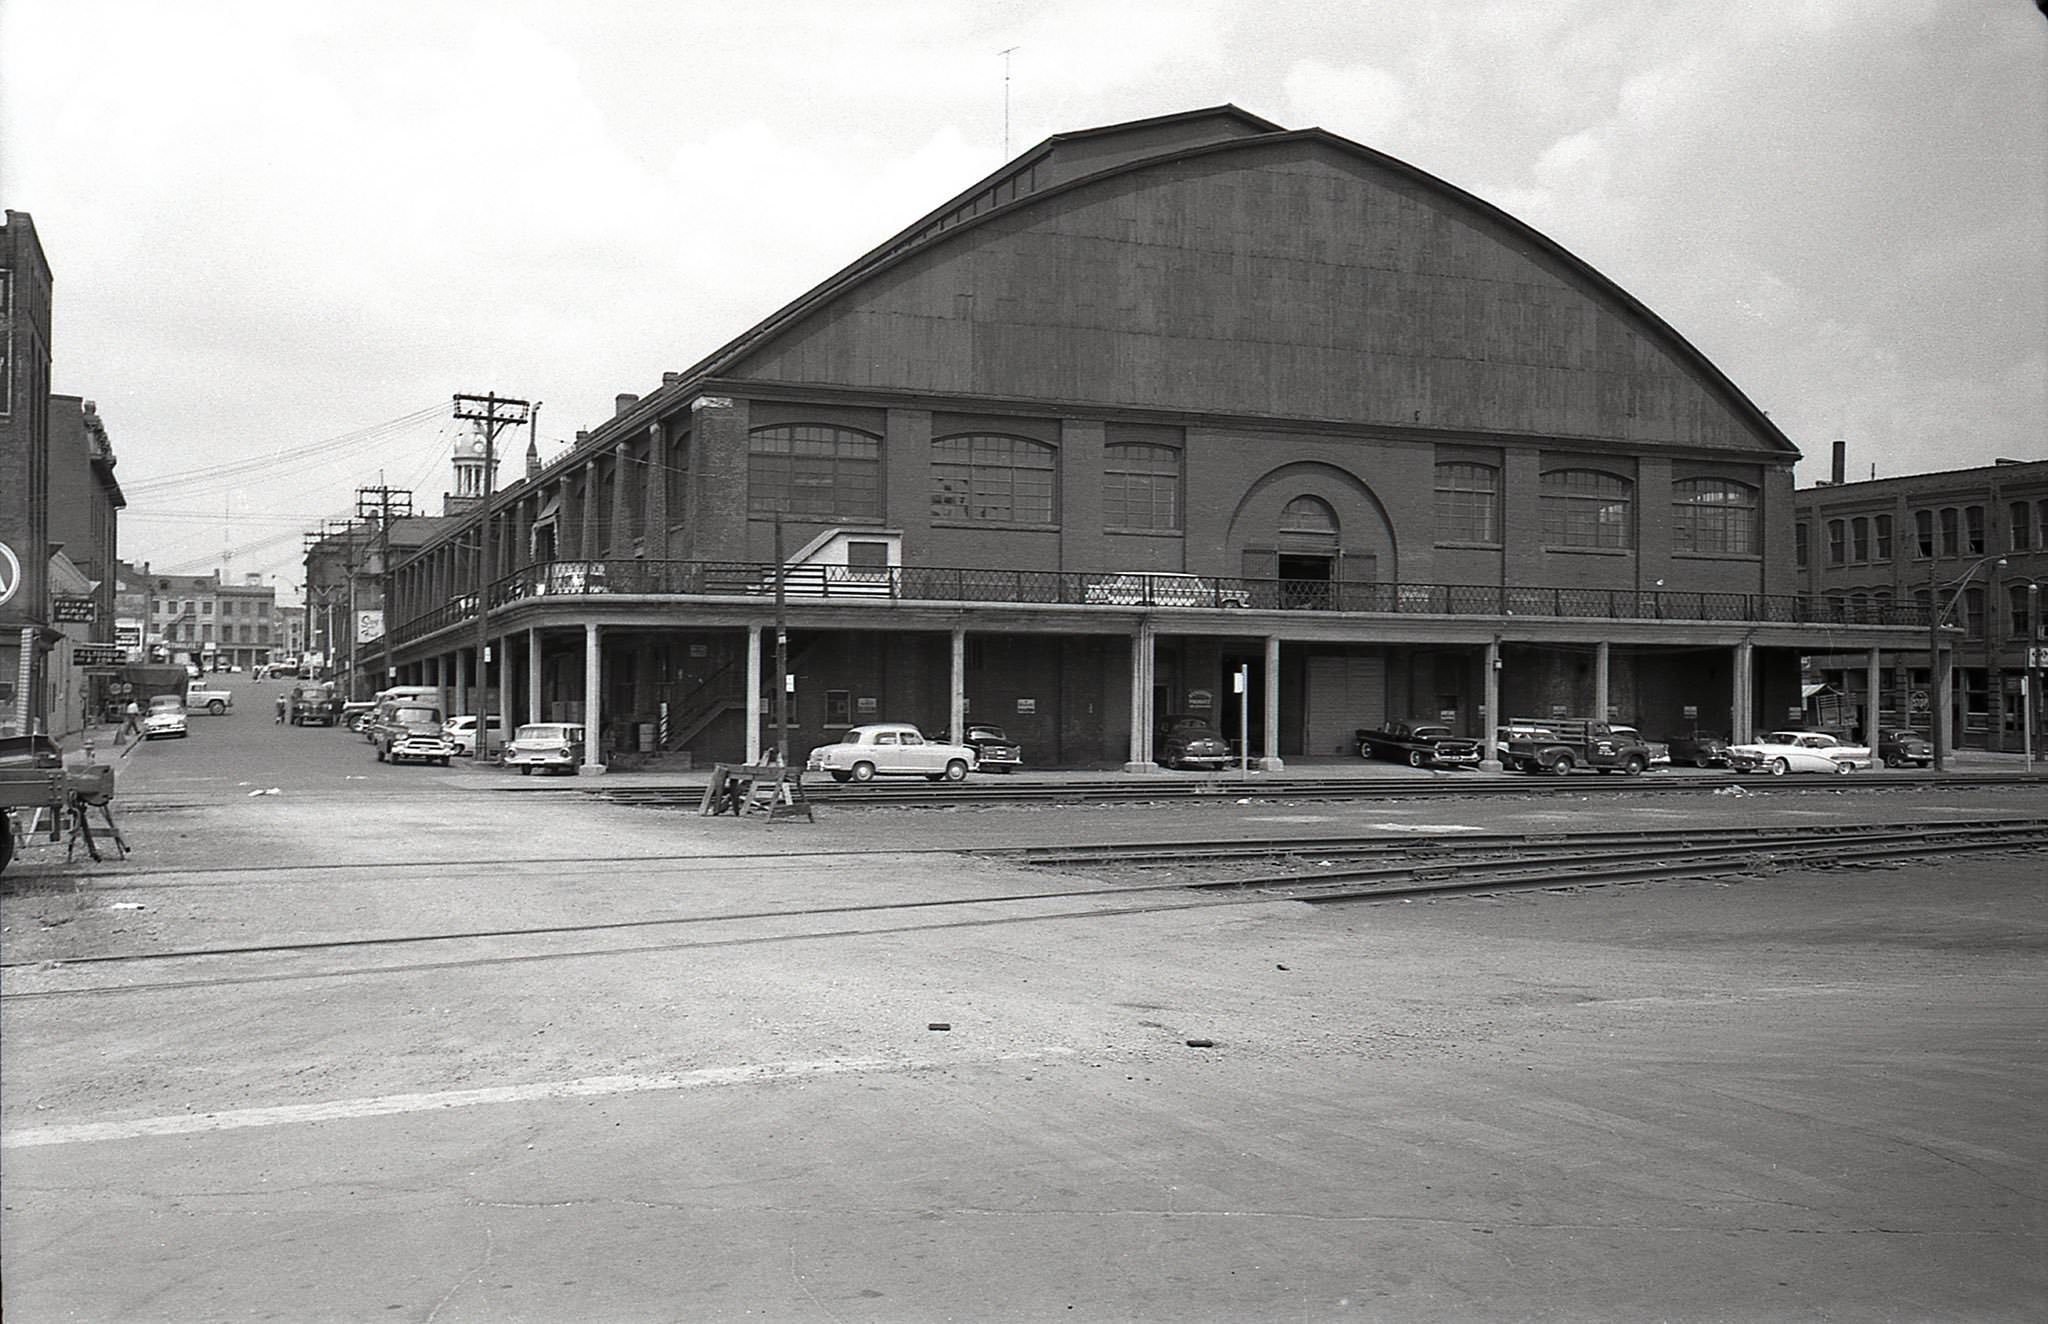 A great shot of St. Lawrence Market and Market Street, before the market’s renovation and area development, 1960s